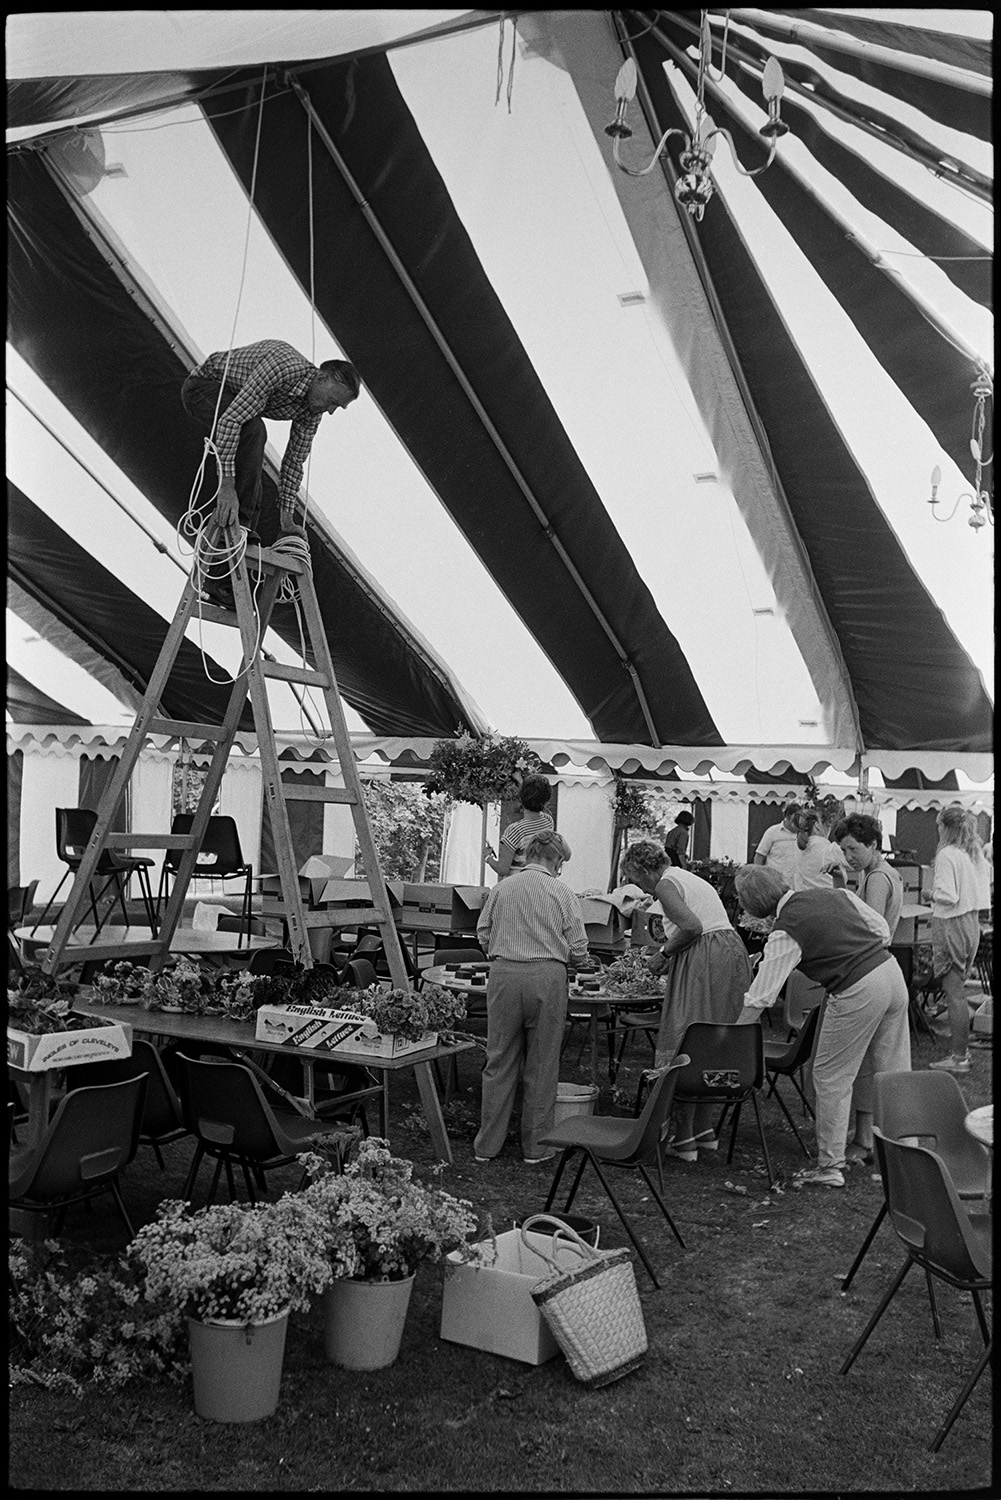 Women decorating marquee tent for hunt ball, flowers, laying tables, tombola, clipping lawn.
[Men and women decorating the inside of a marquee with flowers for the Eggesford Hunt Ball at Colleton Manor, Chulmleigh. One man up a large step ladder fixing lighting to the roof of the marquee.]